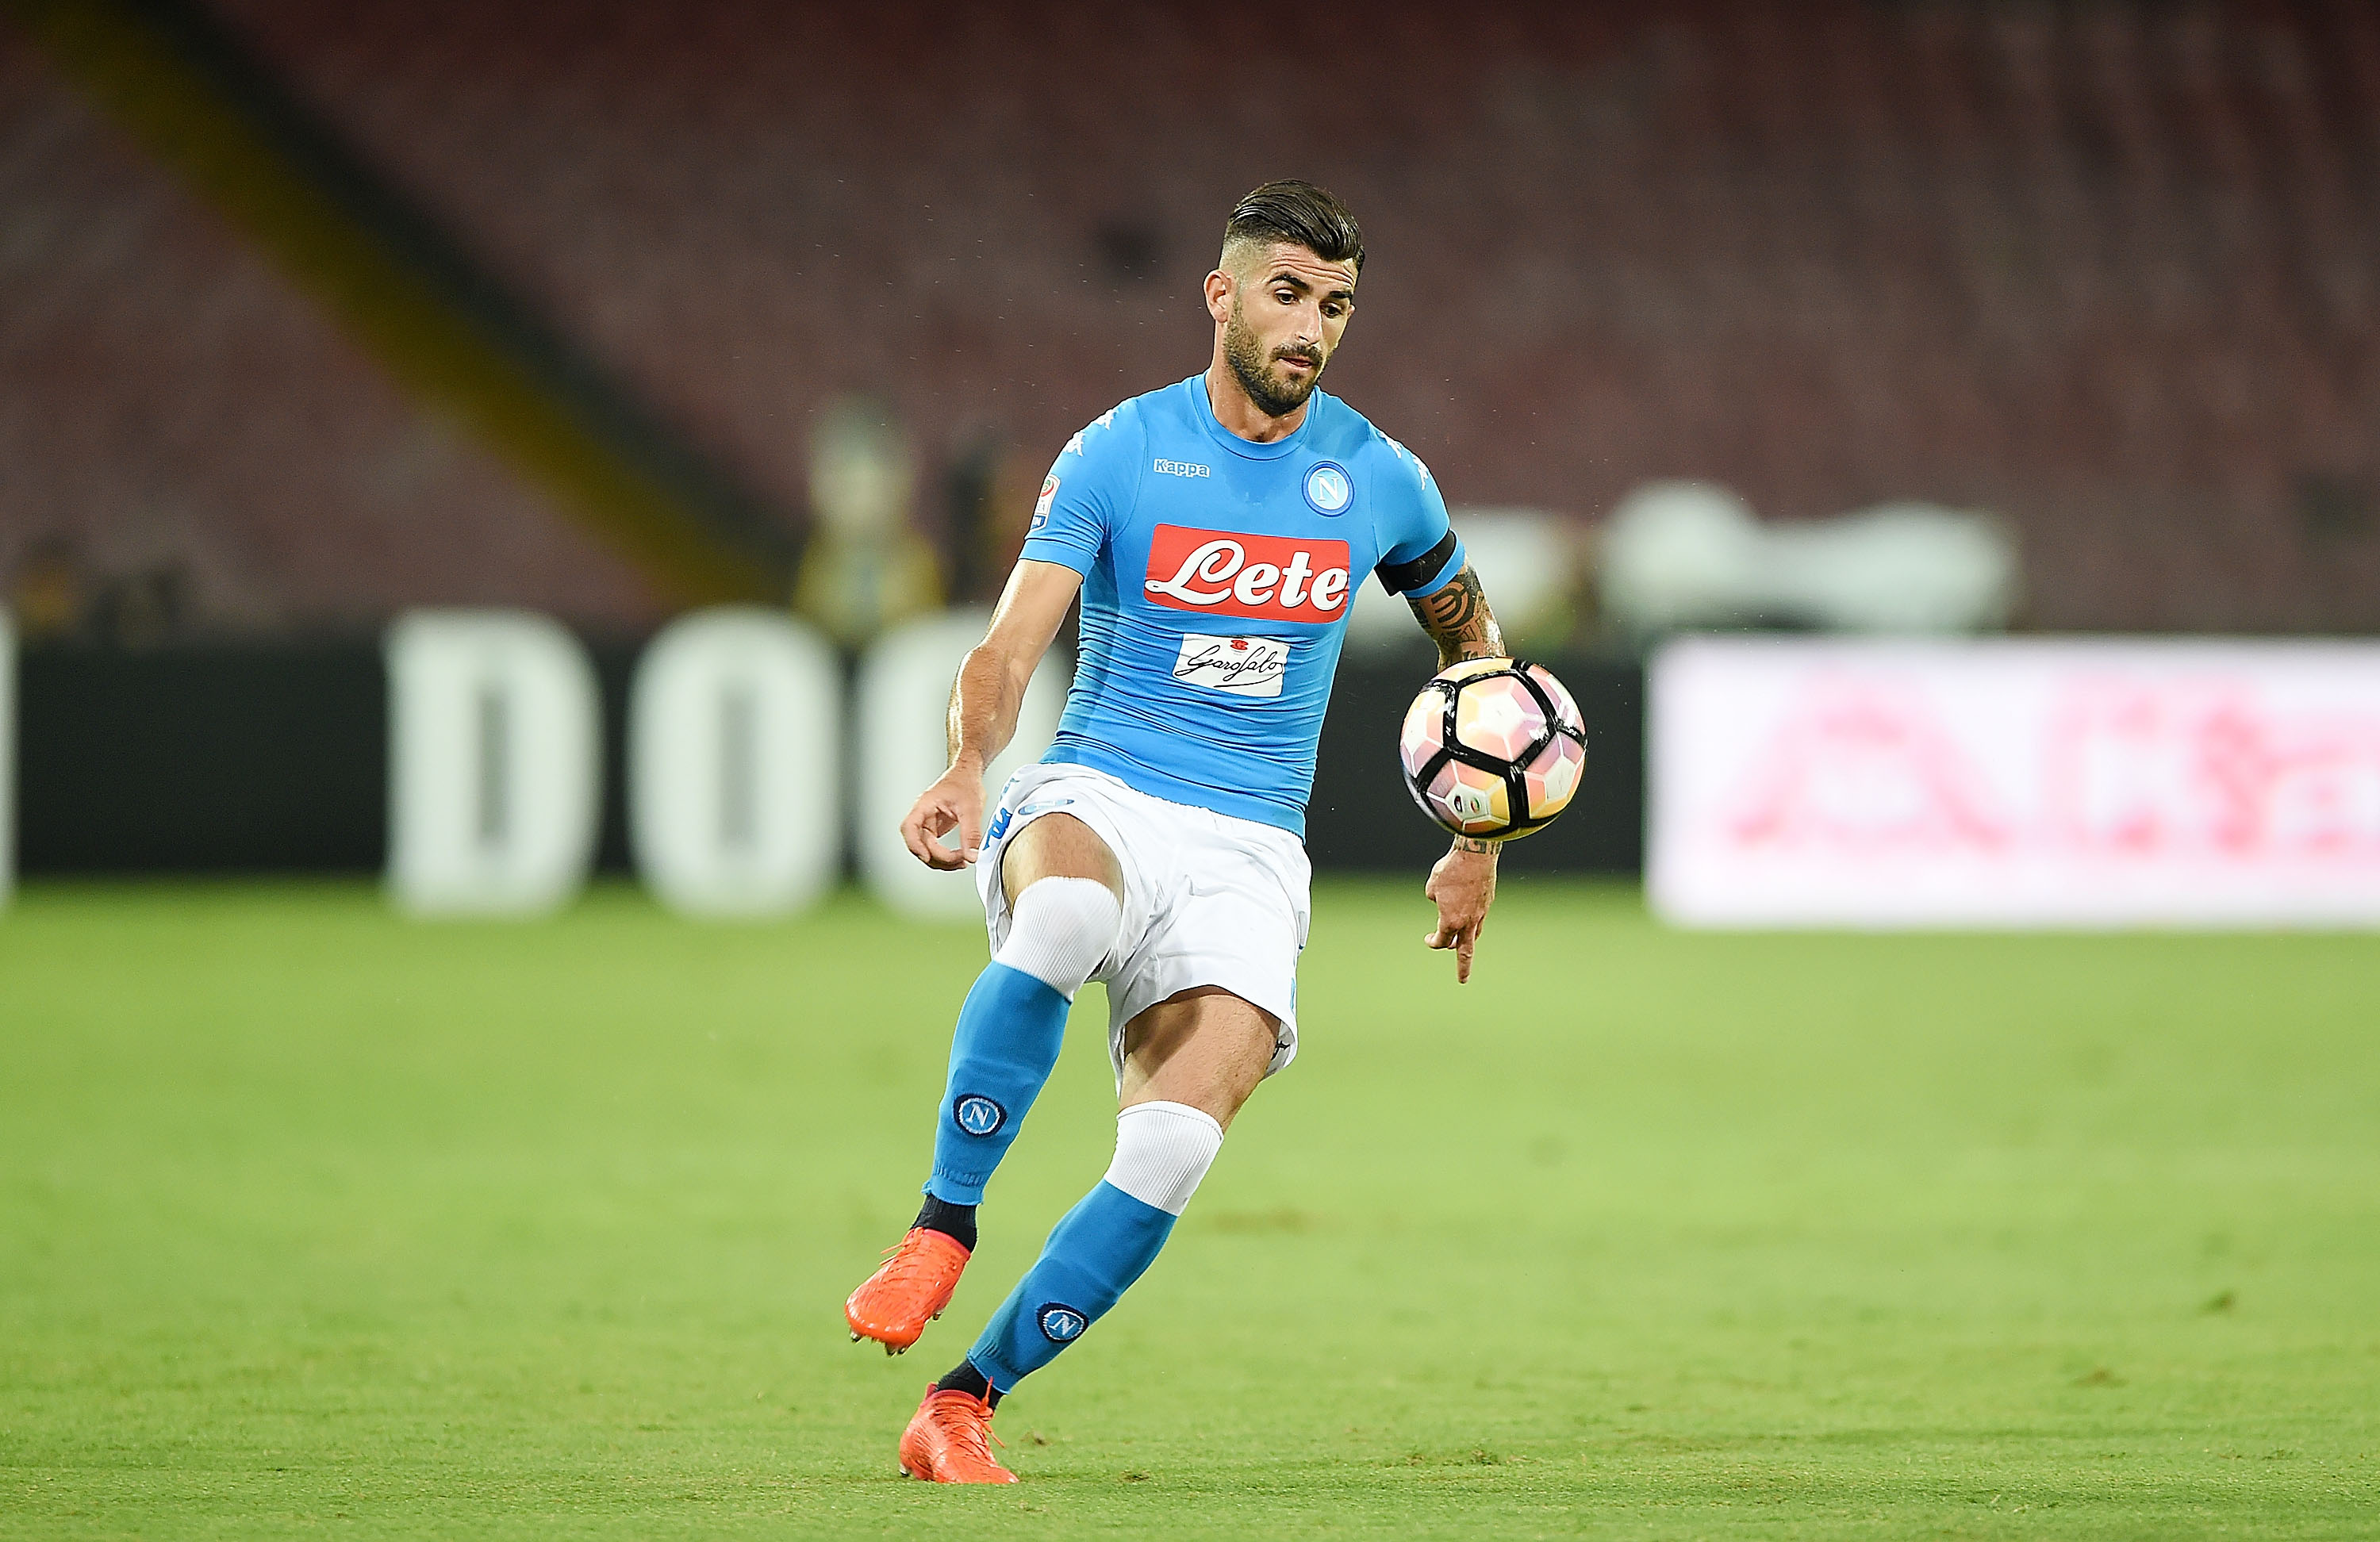 NAPLES, ITALY - AUGUST 27:  Elseid Hysaj of Napoli in action before the Serie A match between SSC Napoli and AC Milan at Stadio San Paolo on August 27, 2016 in Naples, Italy.  (Photo by Francesco Pecoraro/Getty Images)